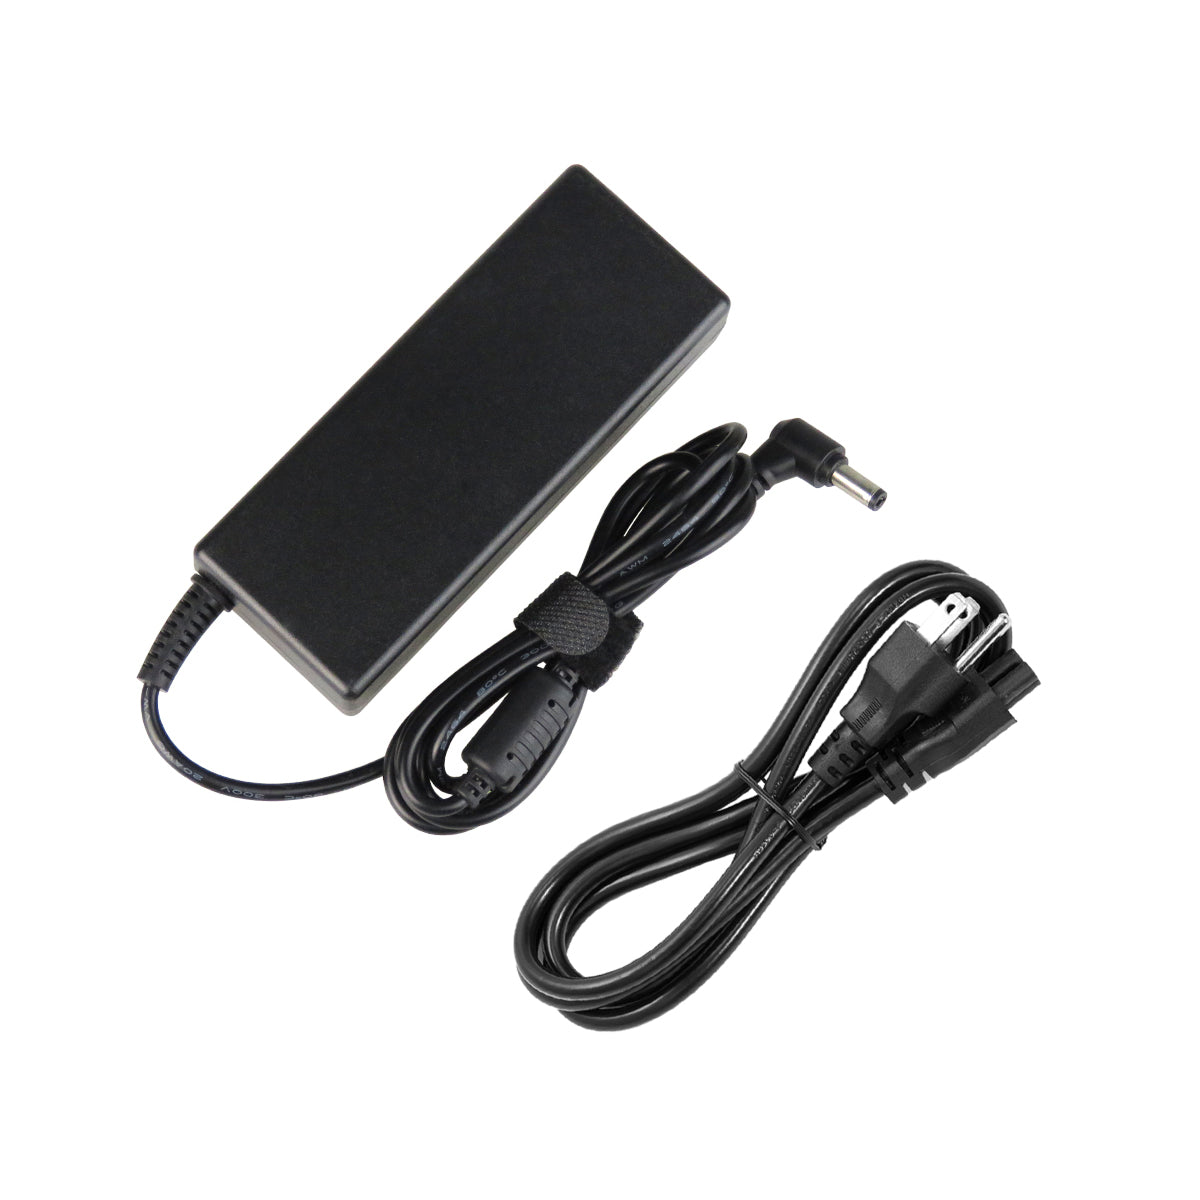 AC Adapter Charger for ASUS X55C-DH31 Notebook.